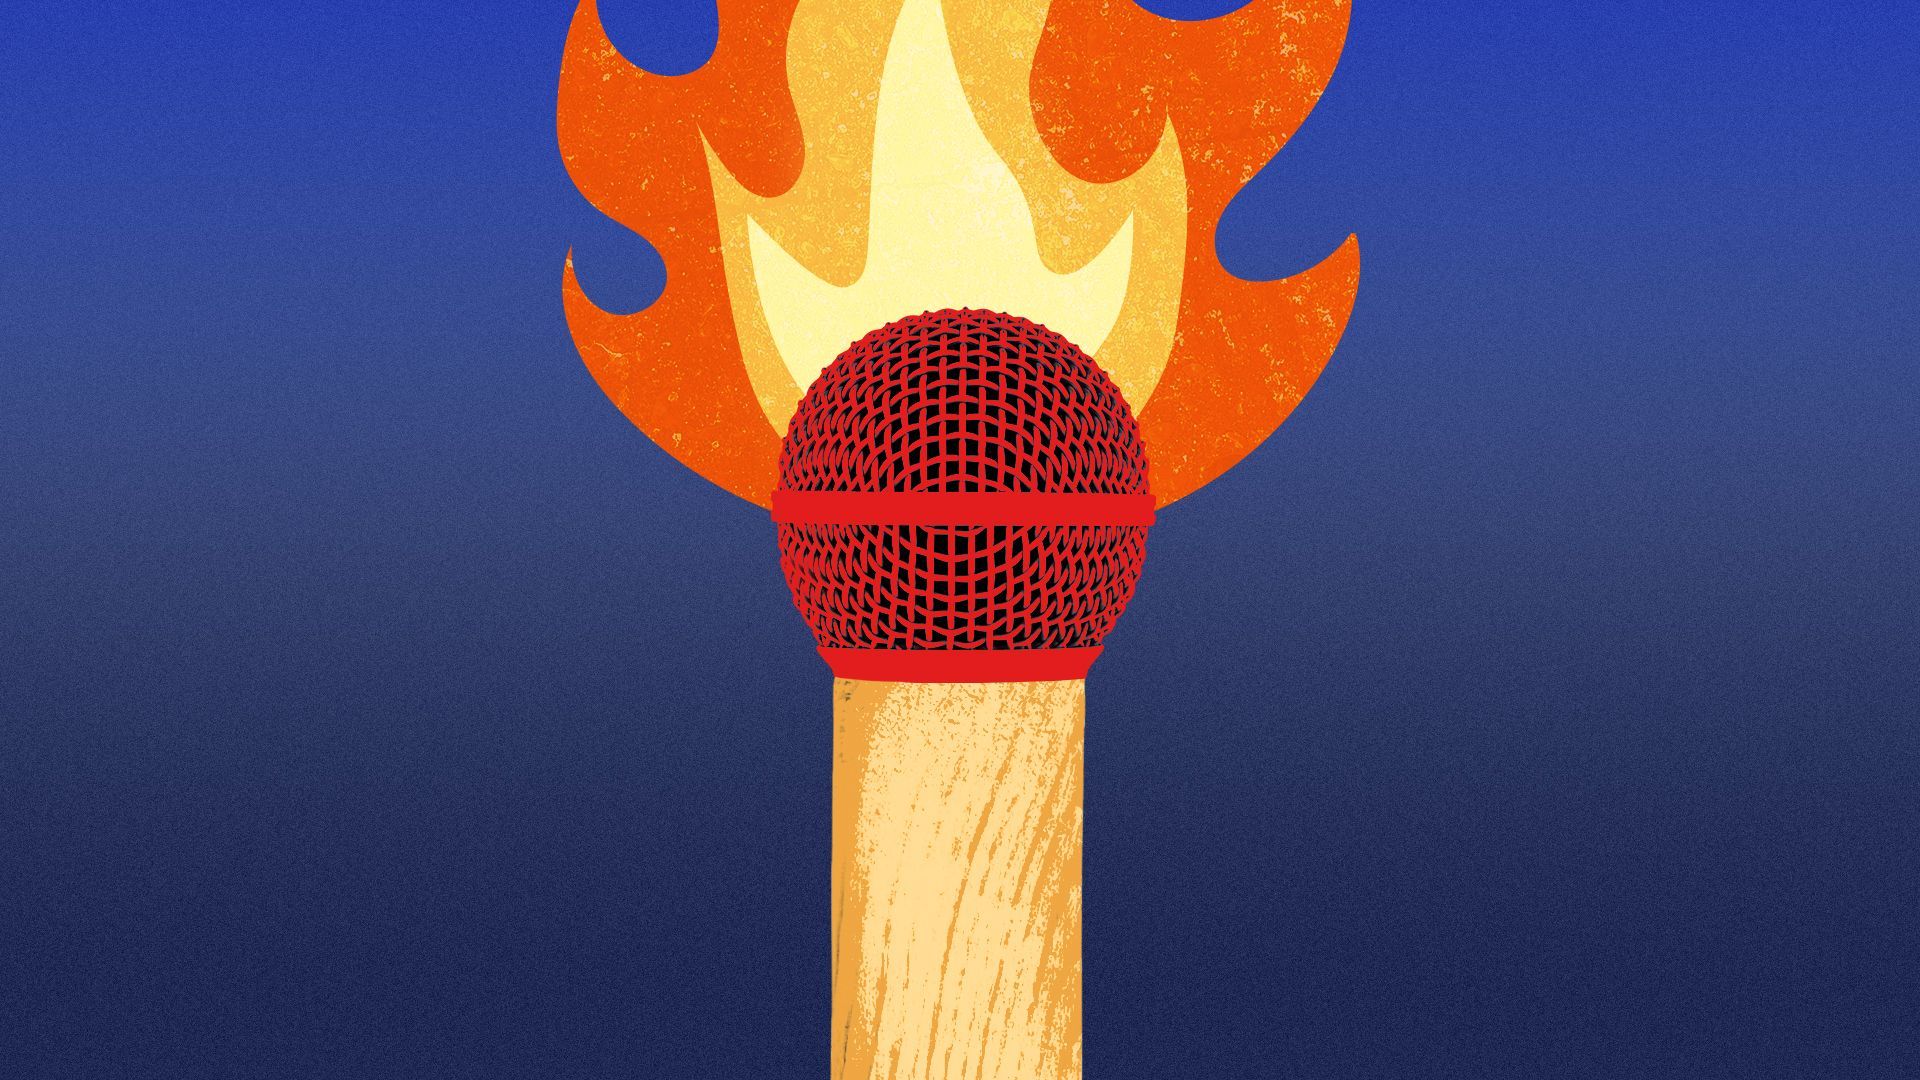 Illustration of a microphone transformed into a matchstick on fire.